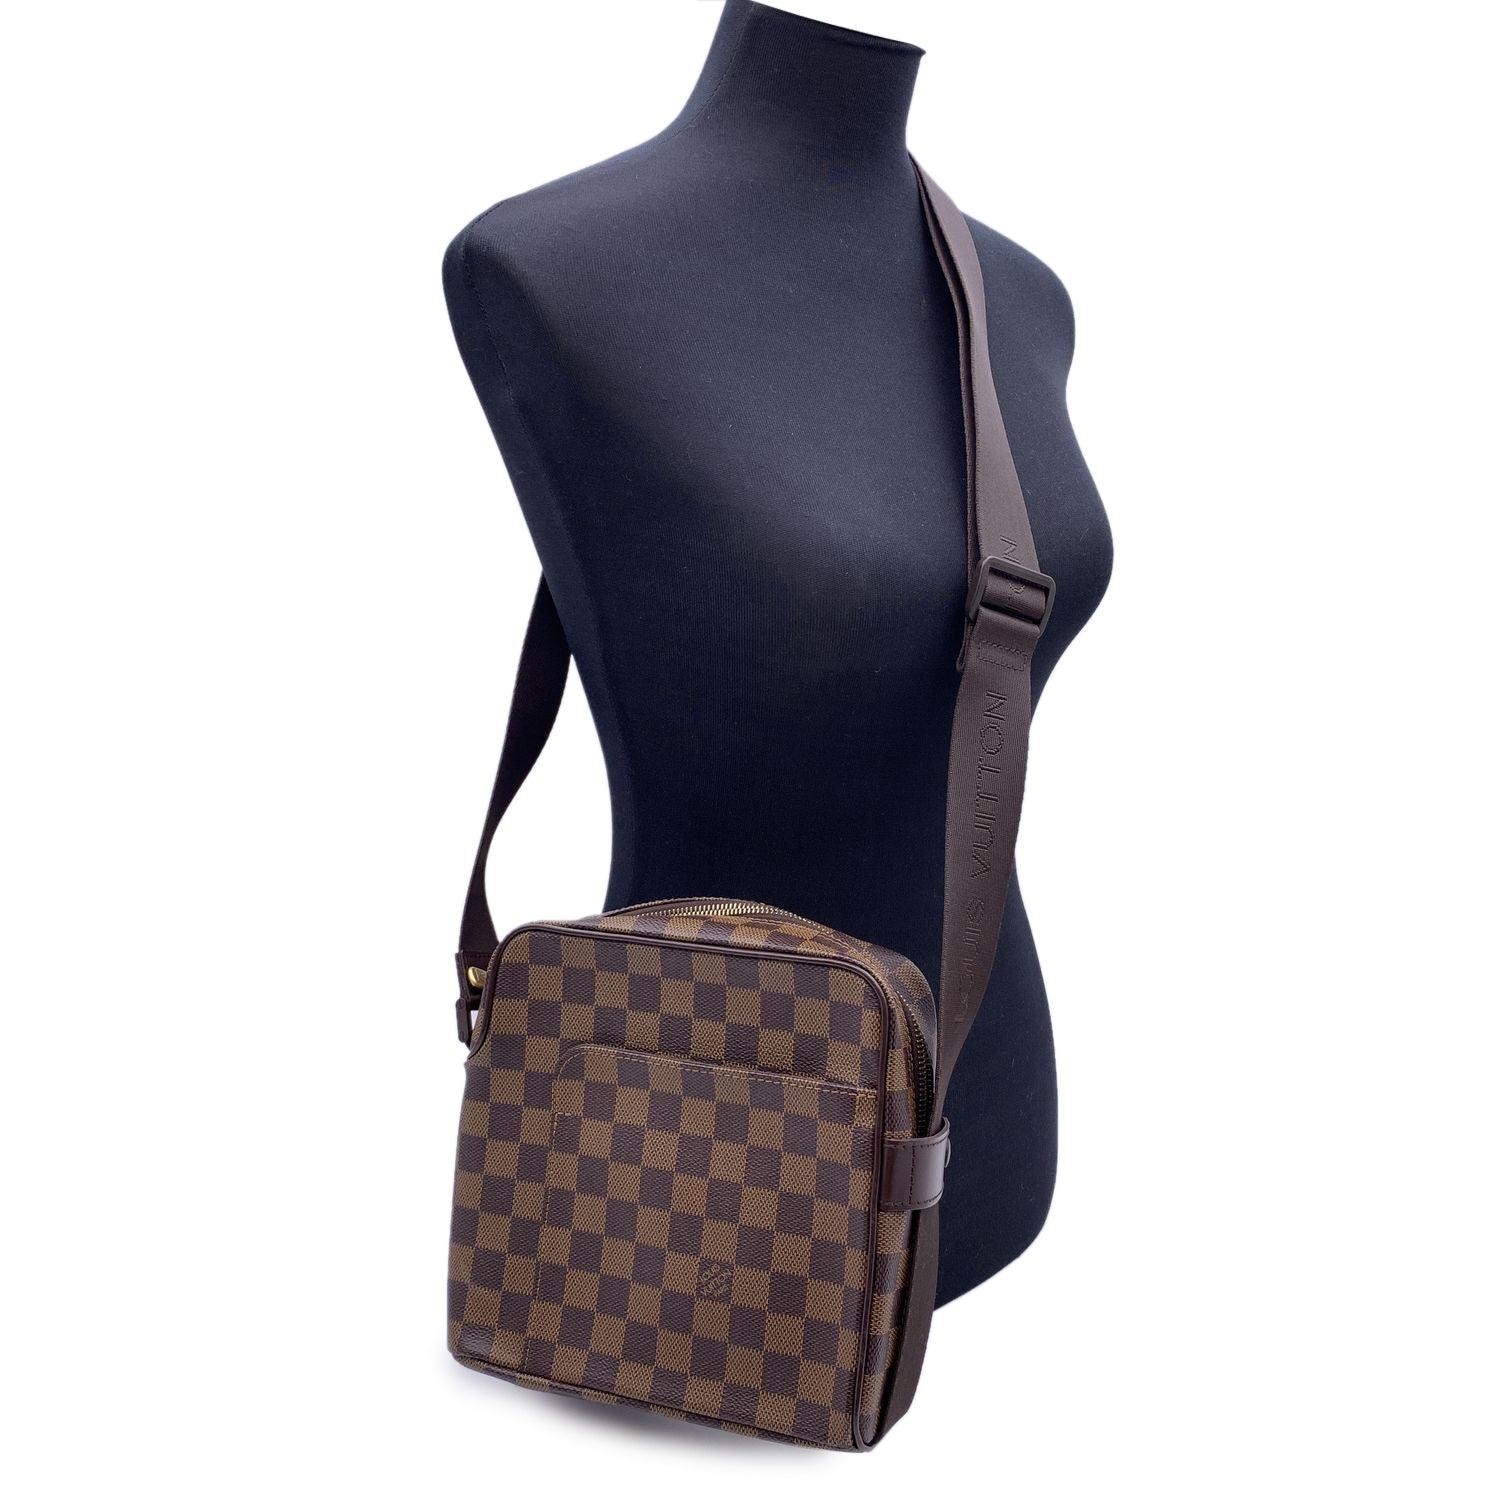 Louis Vuitton Olav PM Messenger Bag. Perfect for the style man or woman. Damier canvas. Double zipper opening. Interior mobile phone pocket. Brown textile lining. Matte brown metallic pieces. Adjustable shoulder strap embroidered with the LOUIS